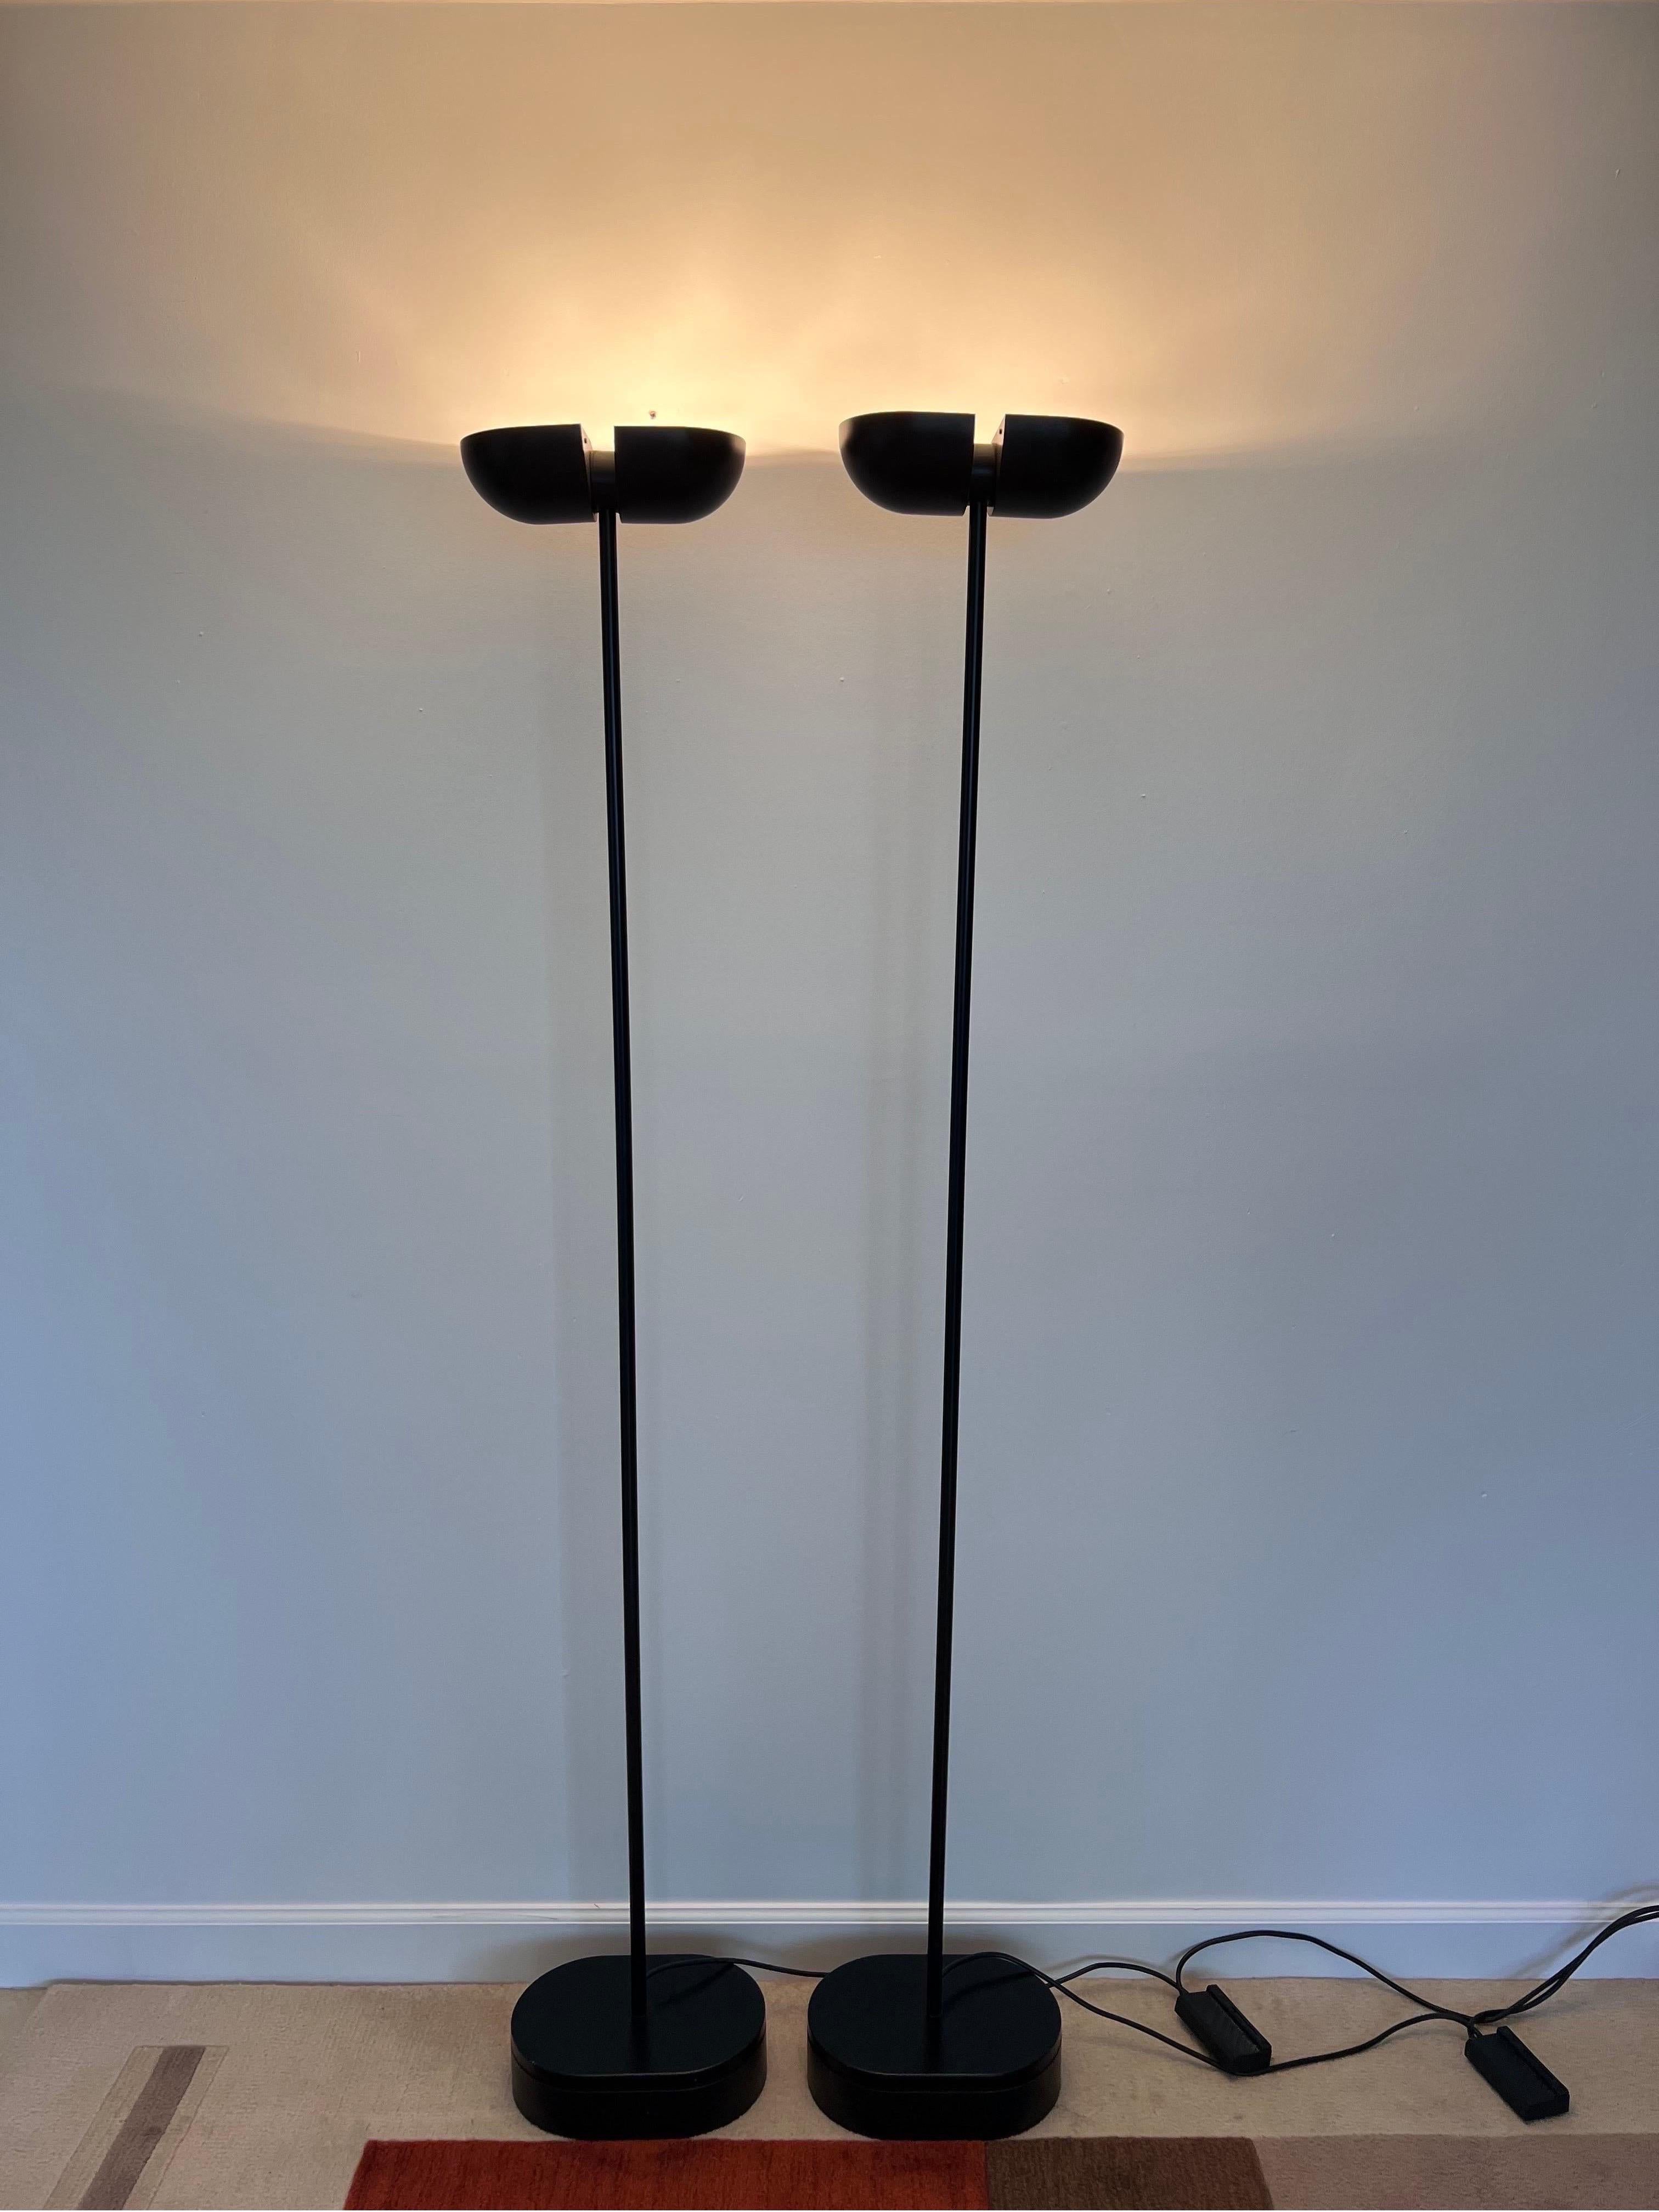 20th Century Postmodern Black Torchiere Floor Lamps with Adjustable Heads, 1980s, a Pair